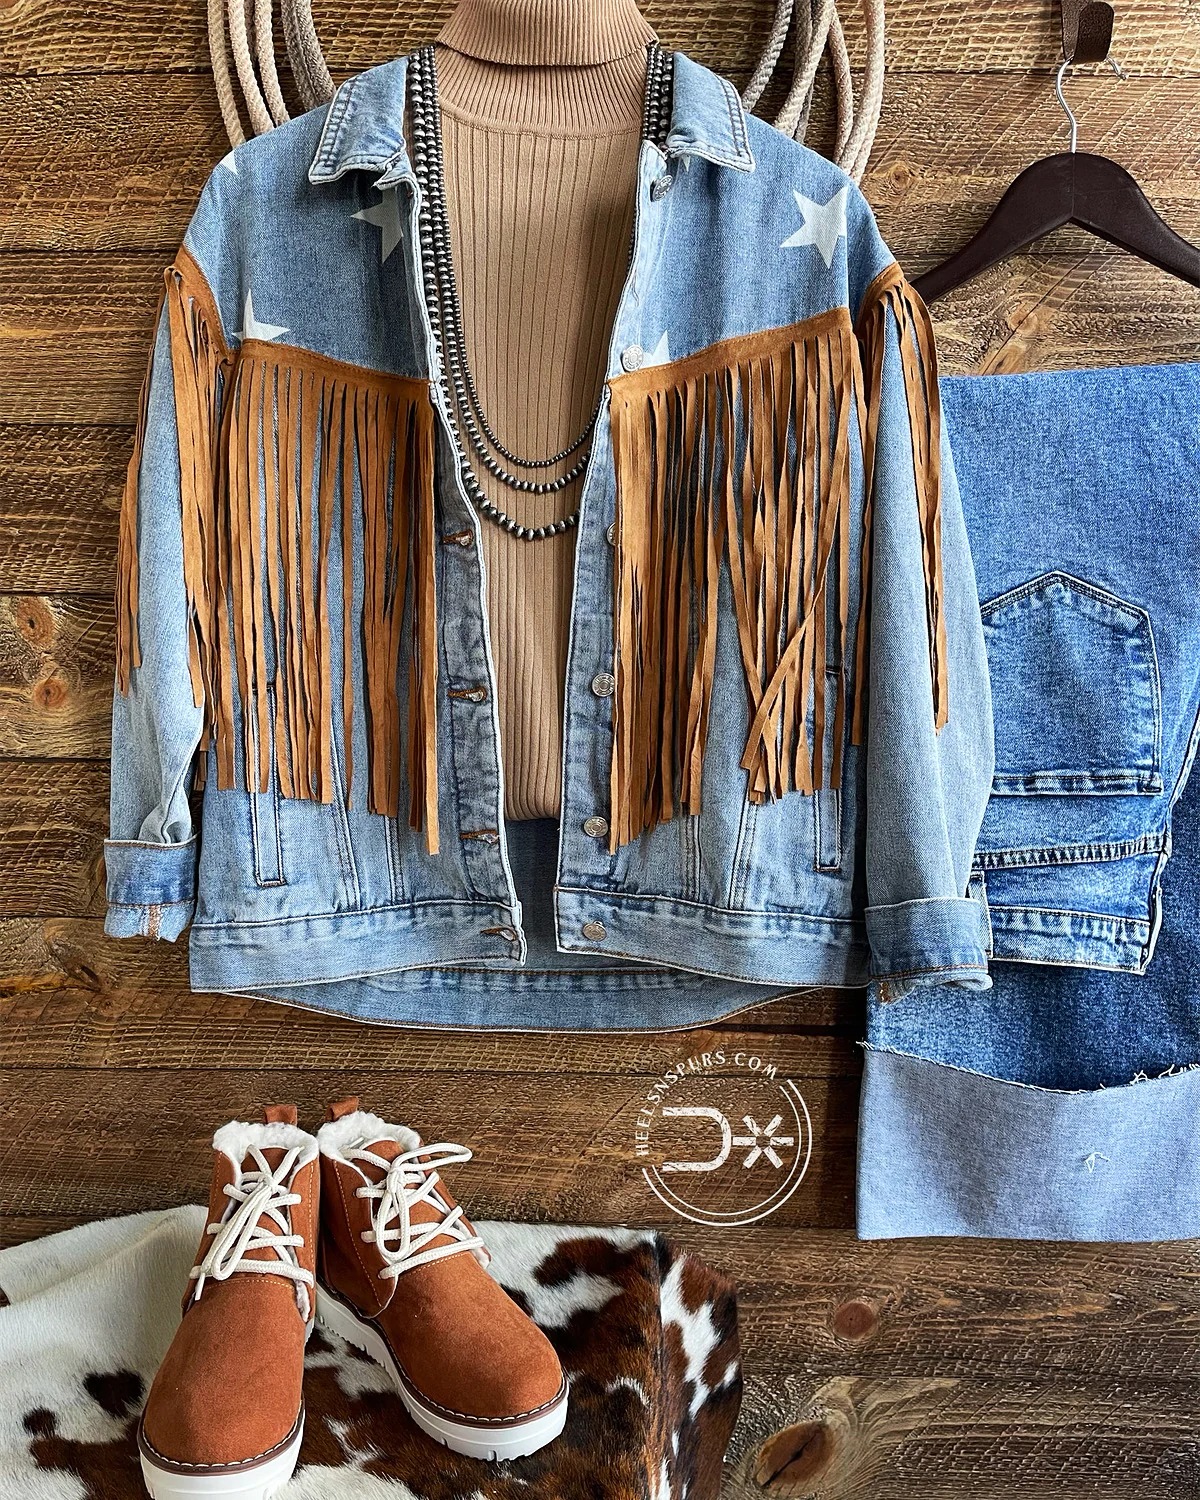 A Denim Jacket with a White Tank Top and Jeans